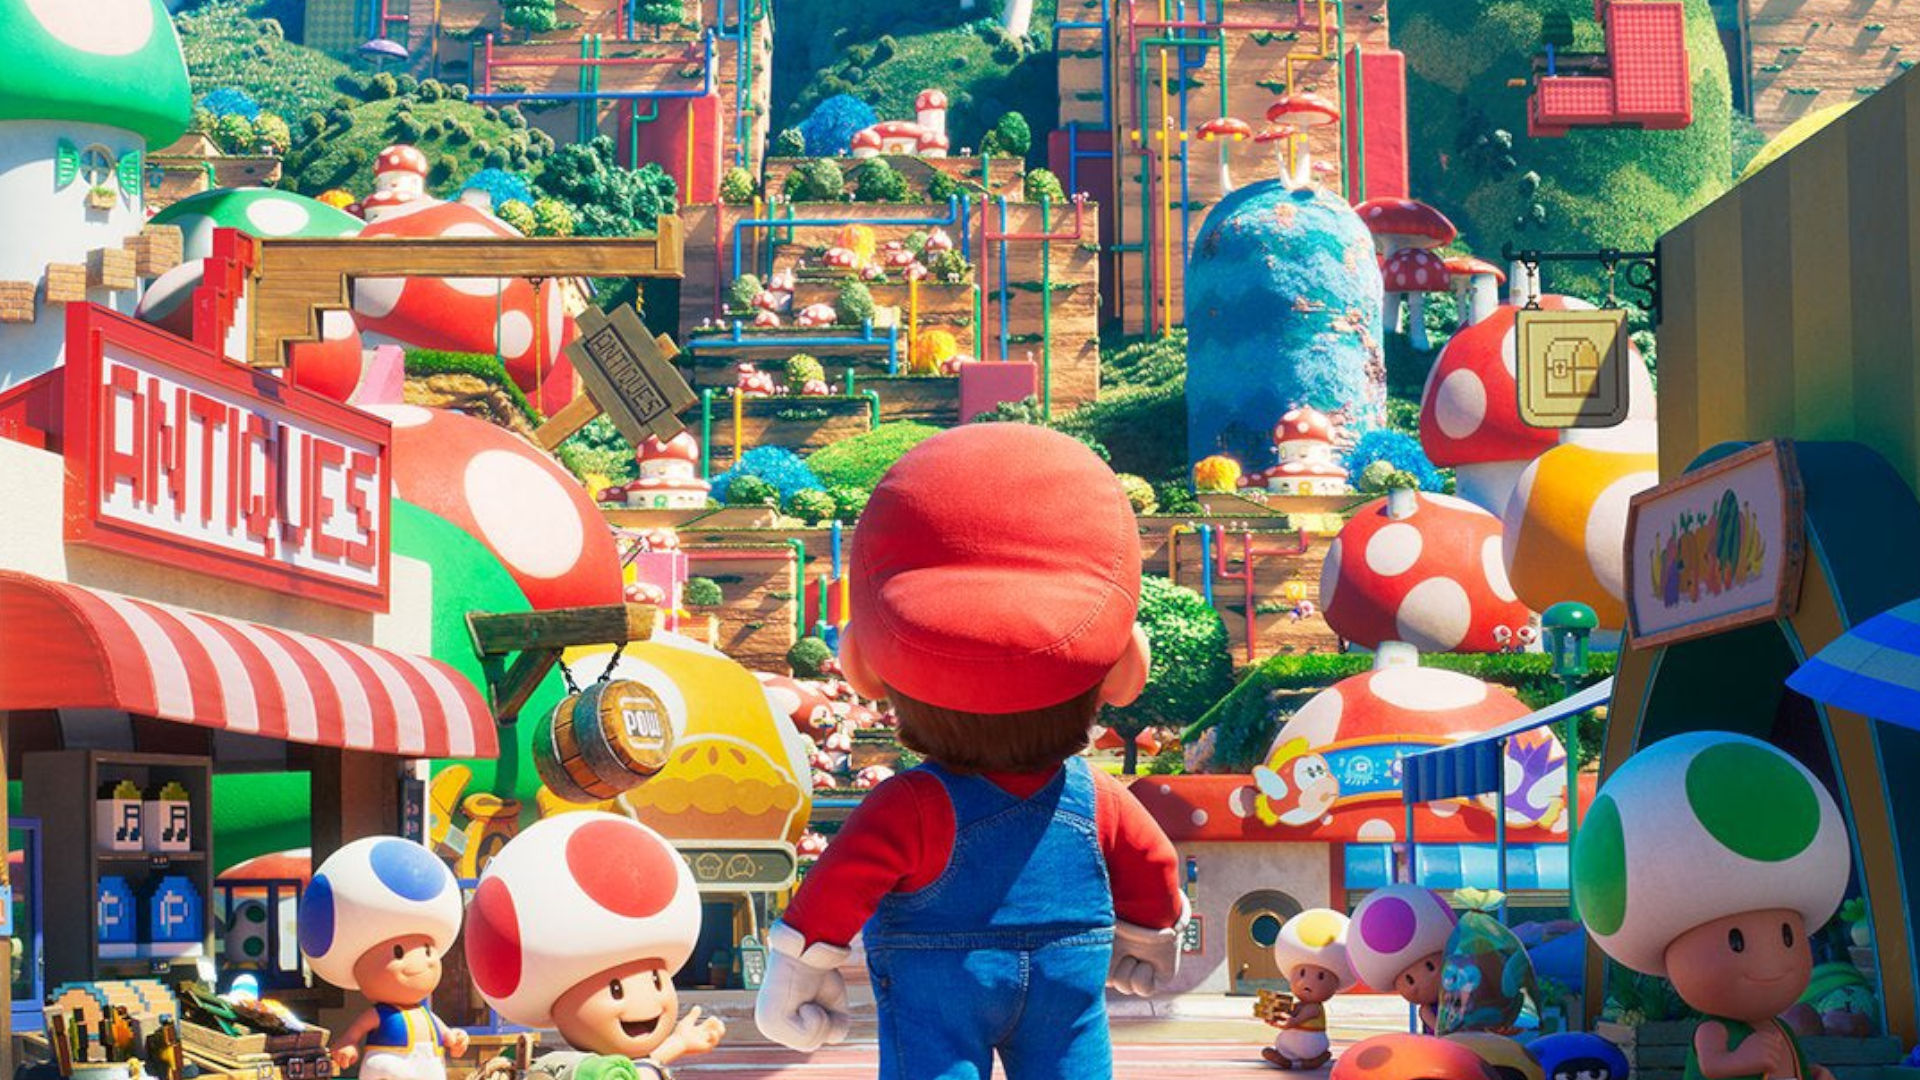 Mario movie poster sends Nintendo fan theories into overdrive